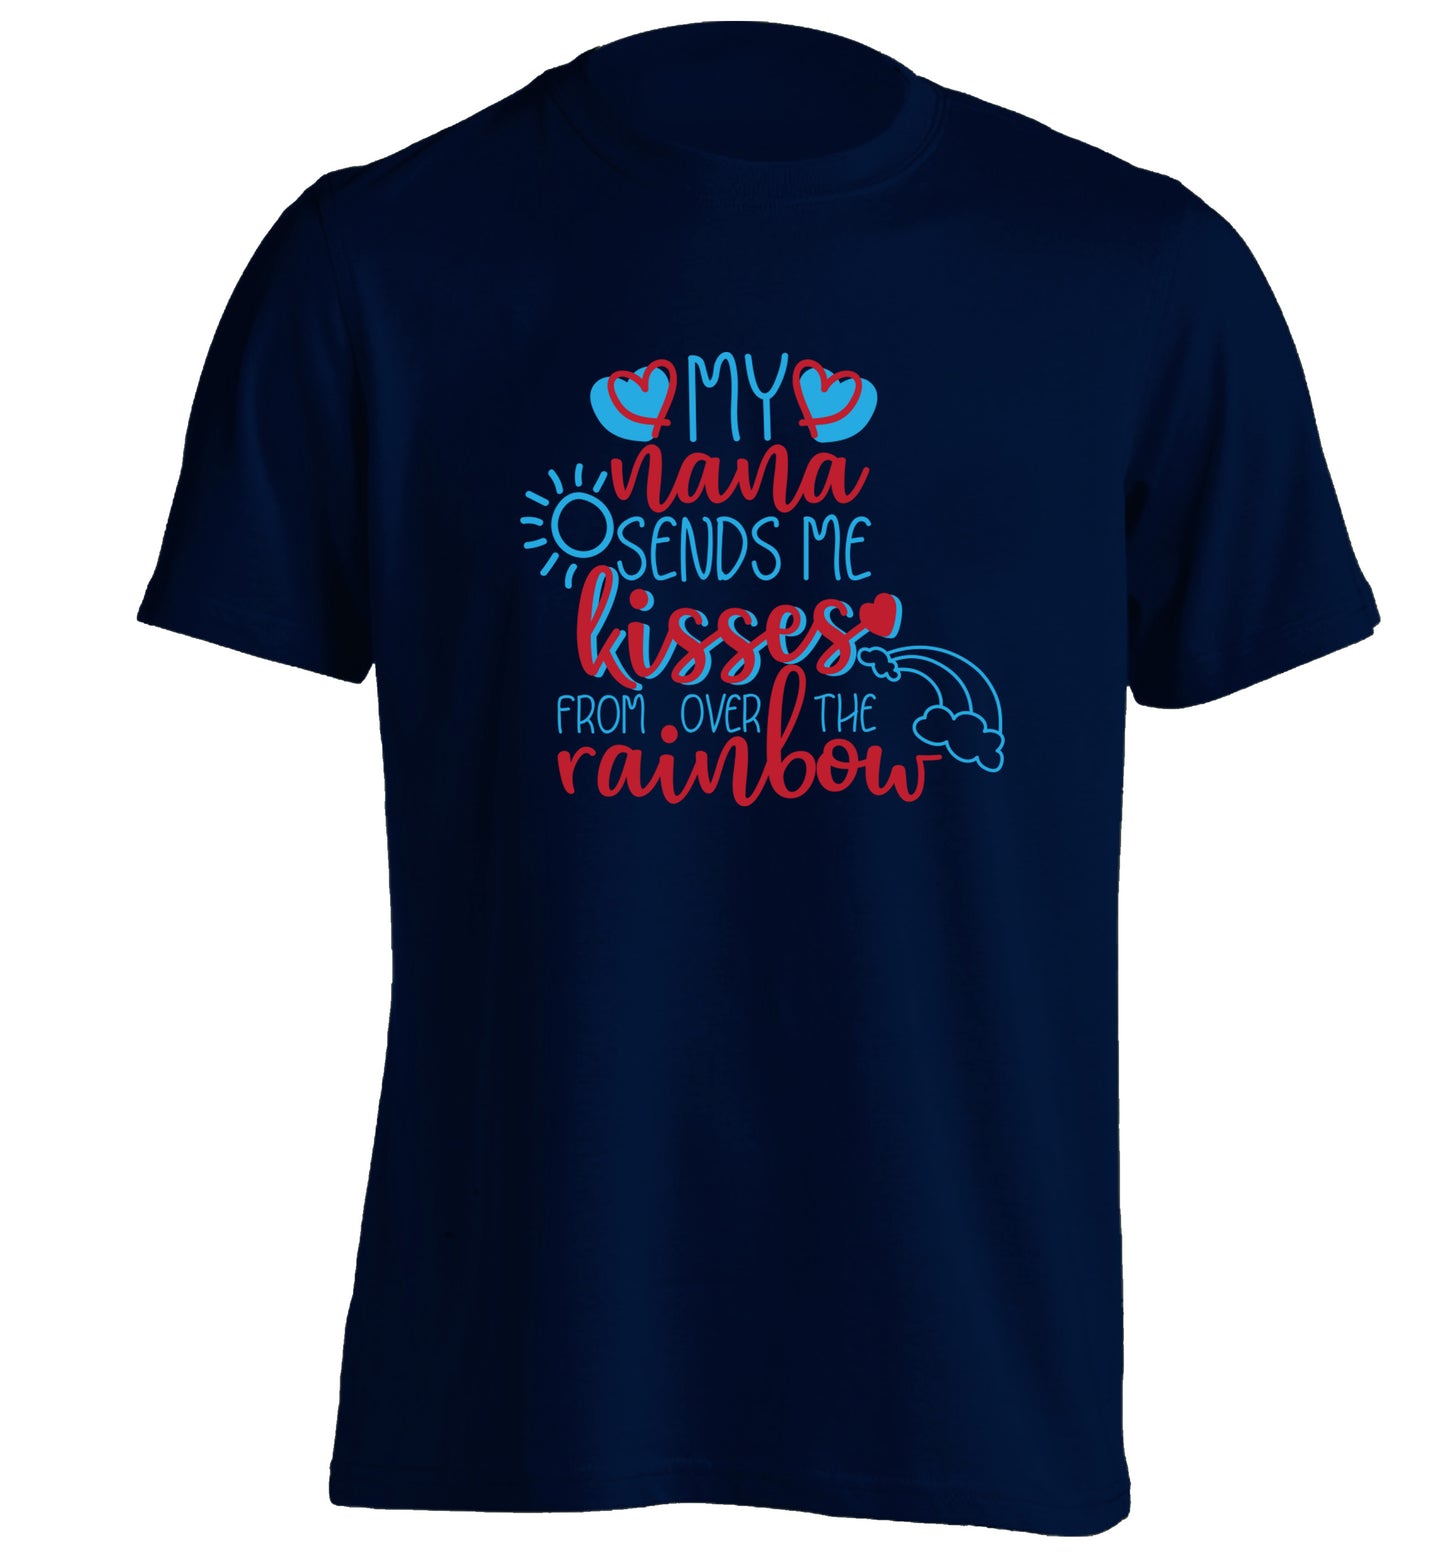 My nana sends me kisses from over the rainbow adults unisex navy Tshirt 2XL